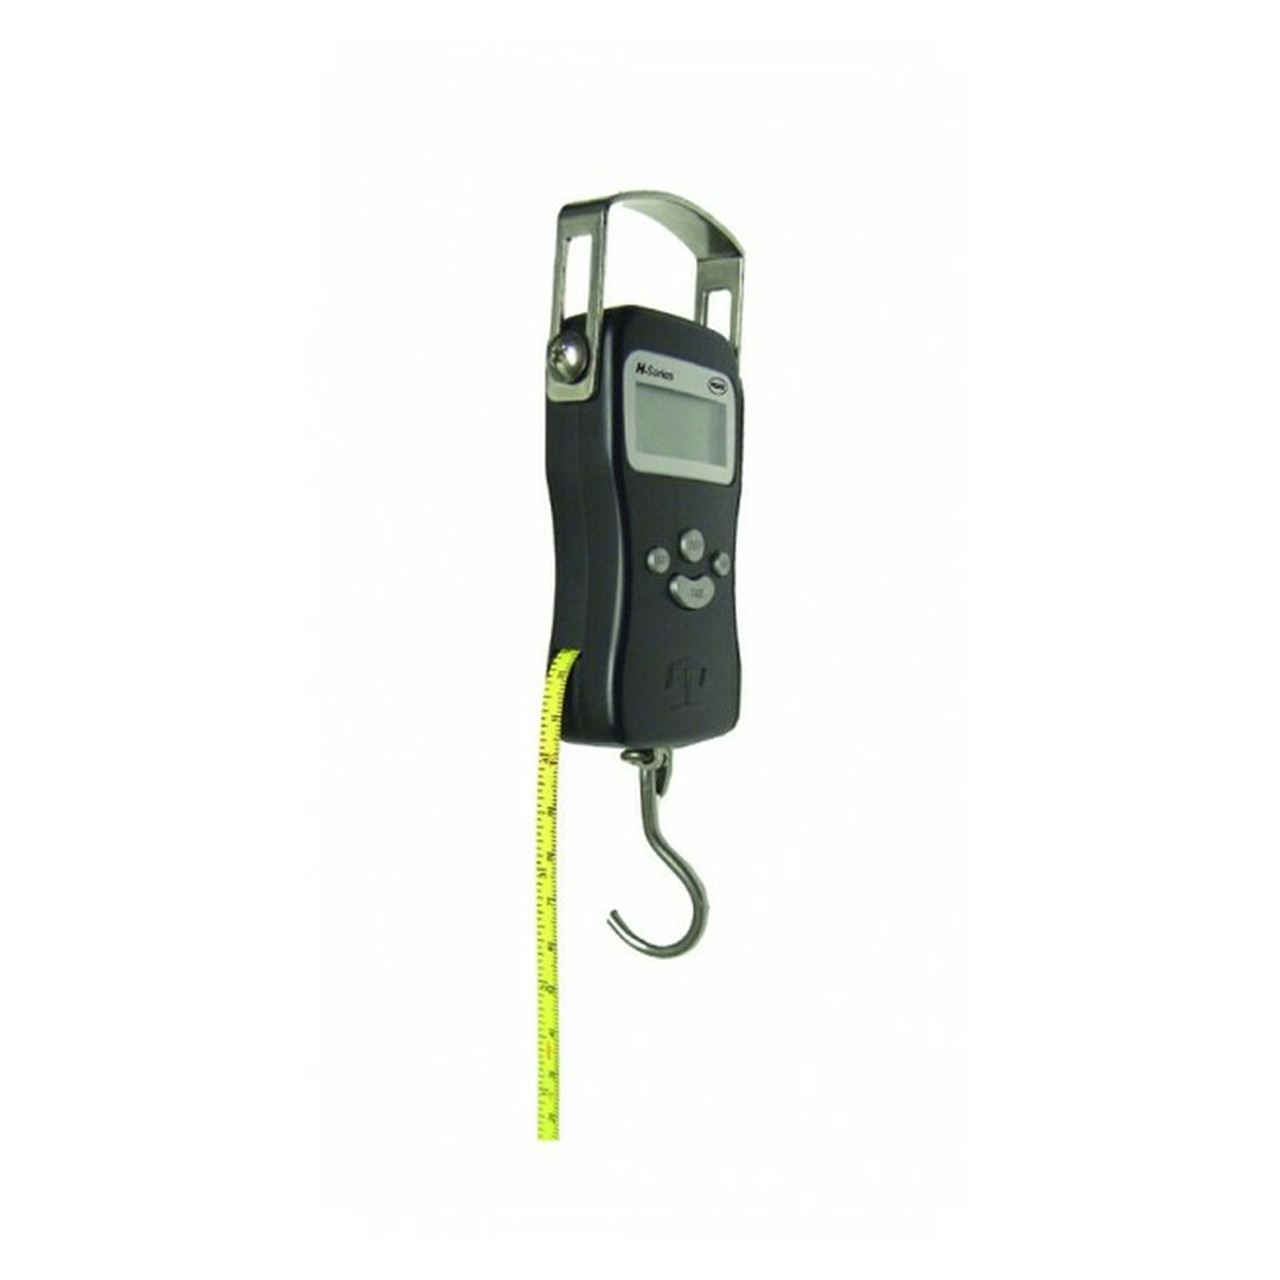 LS-110 DIGITAL HANGING LUGGAGE SCALE, 110LBS X 0.2LBS - American Weigh  Scales